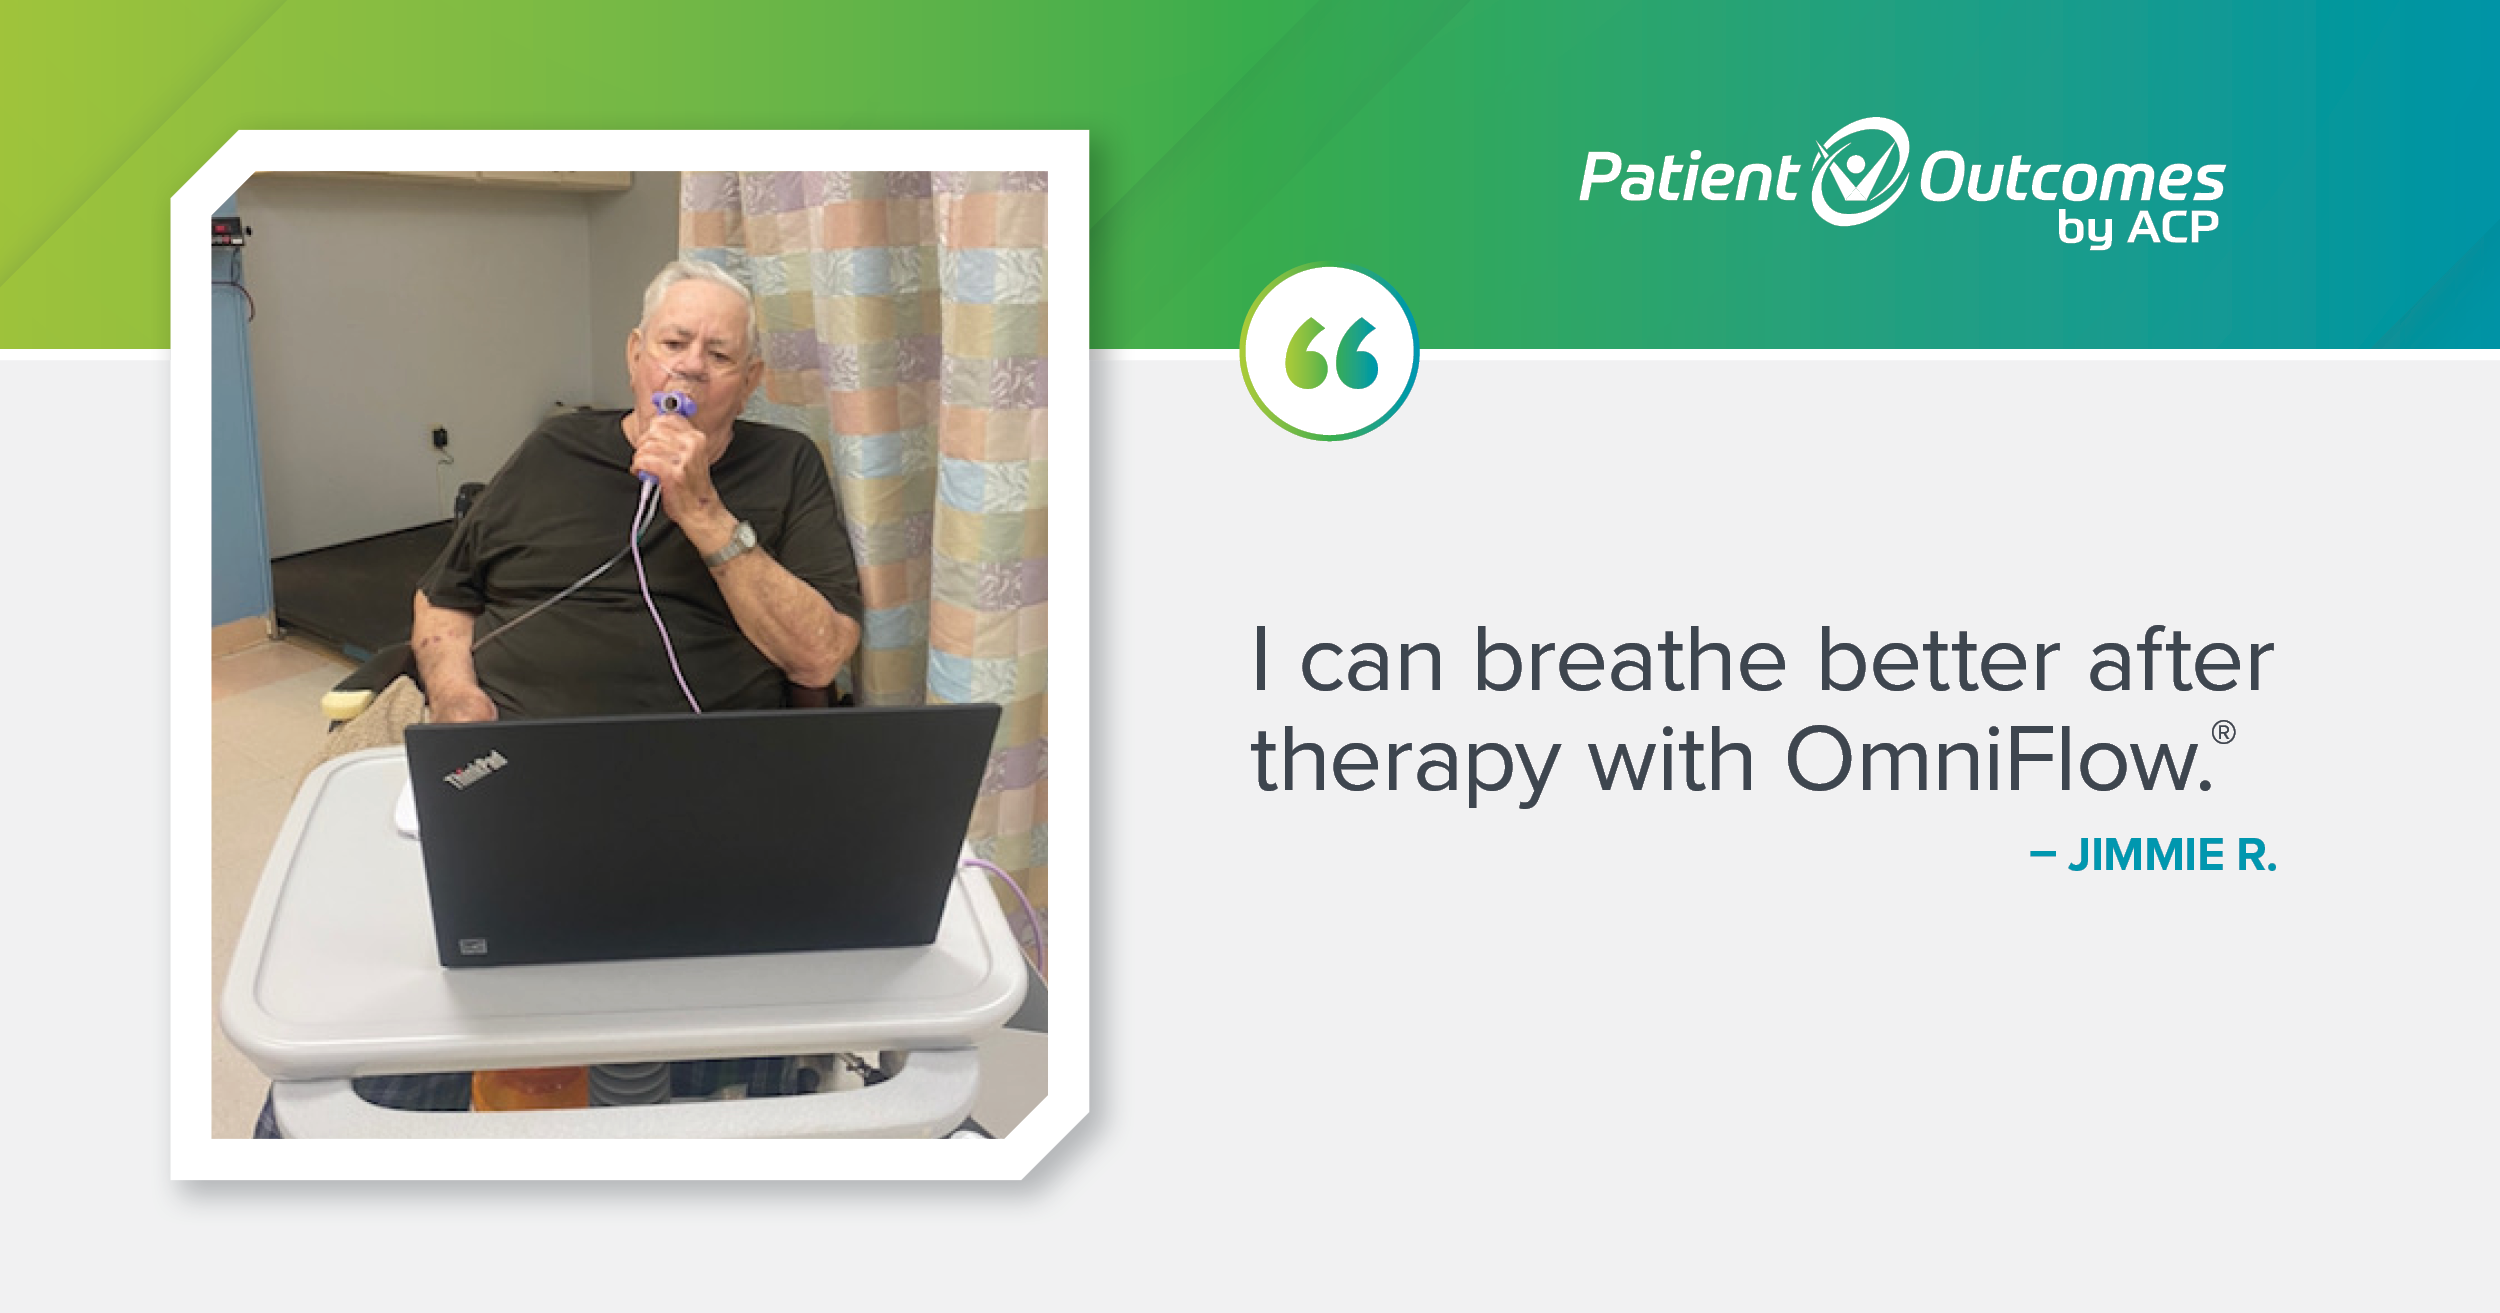 Image of Jimmie R., an older male patient, using Accelerated Care Plus' OmniFlow Breathing Therapy Biofeedback System.